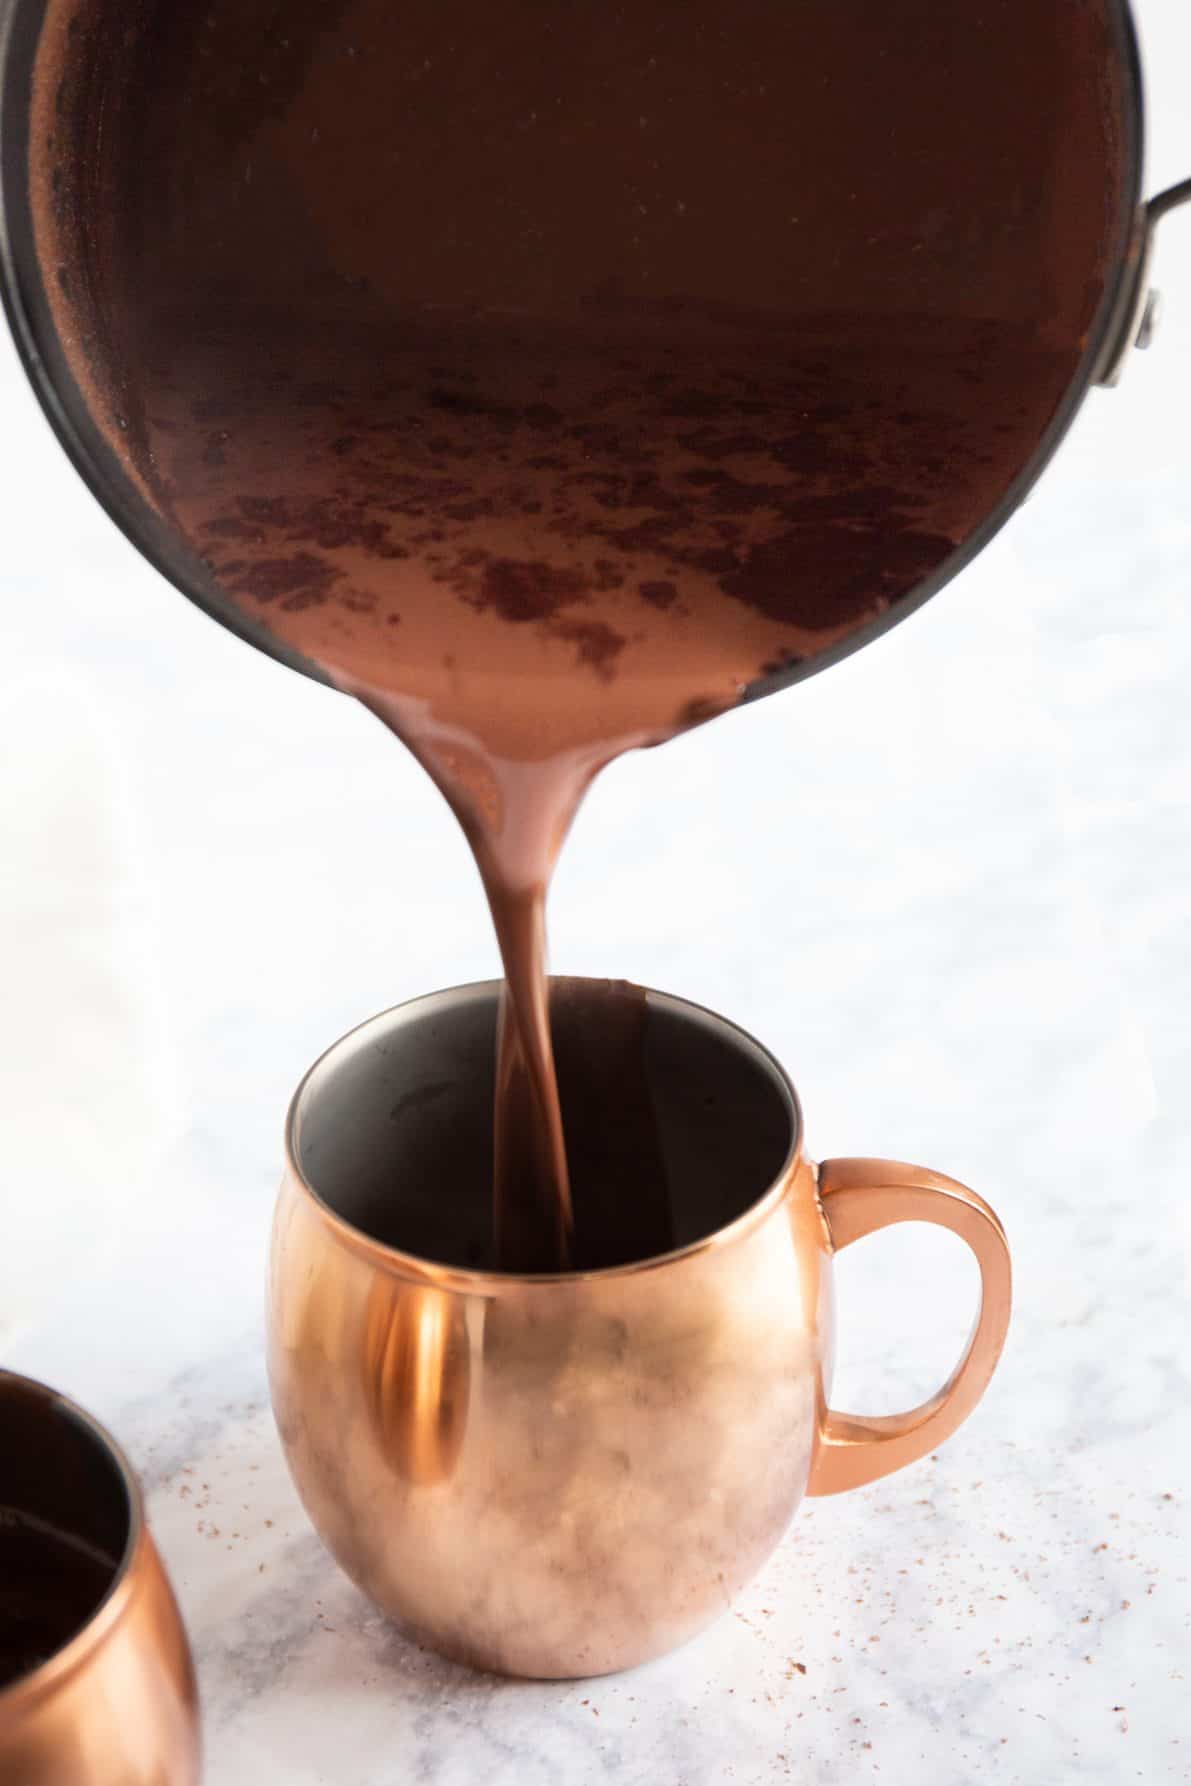 A saucepan filled with Mexican hot chocolate pouring into a copper mug.